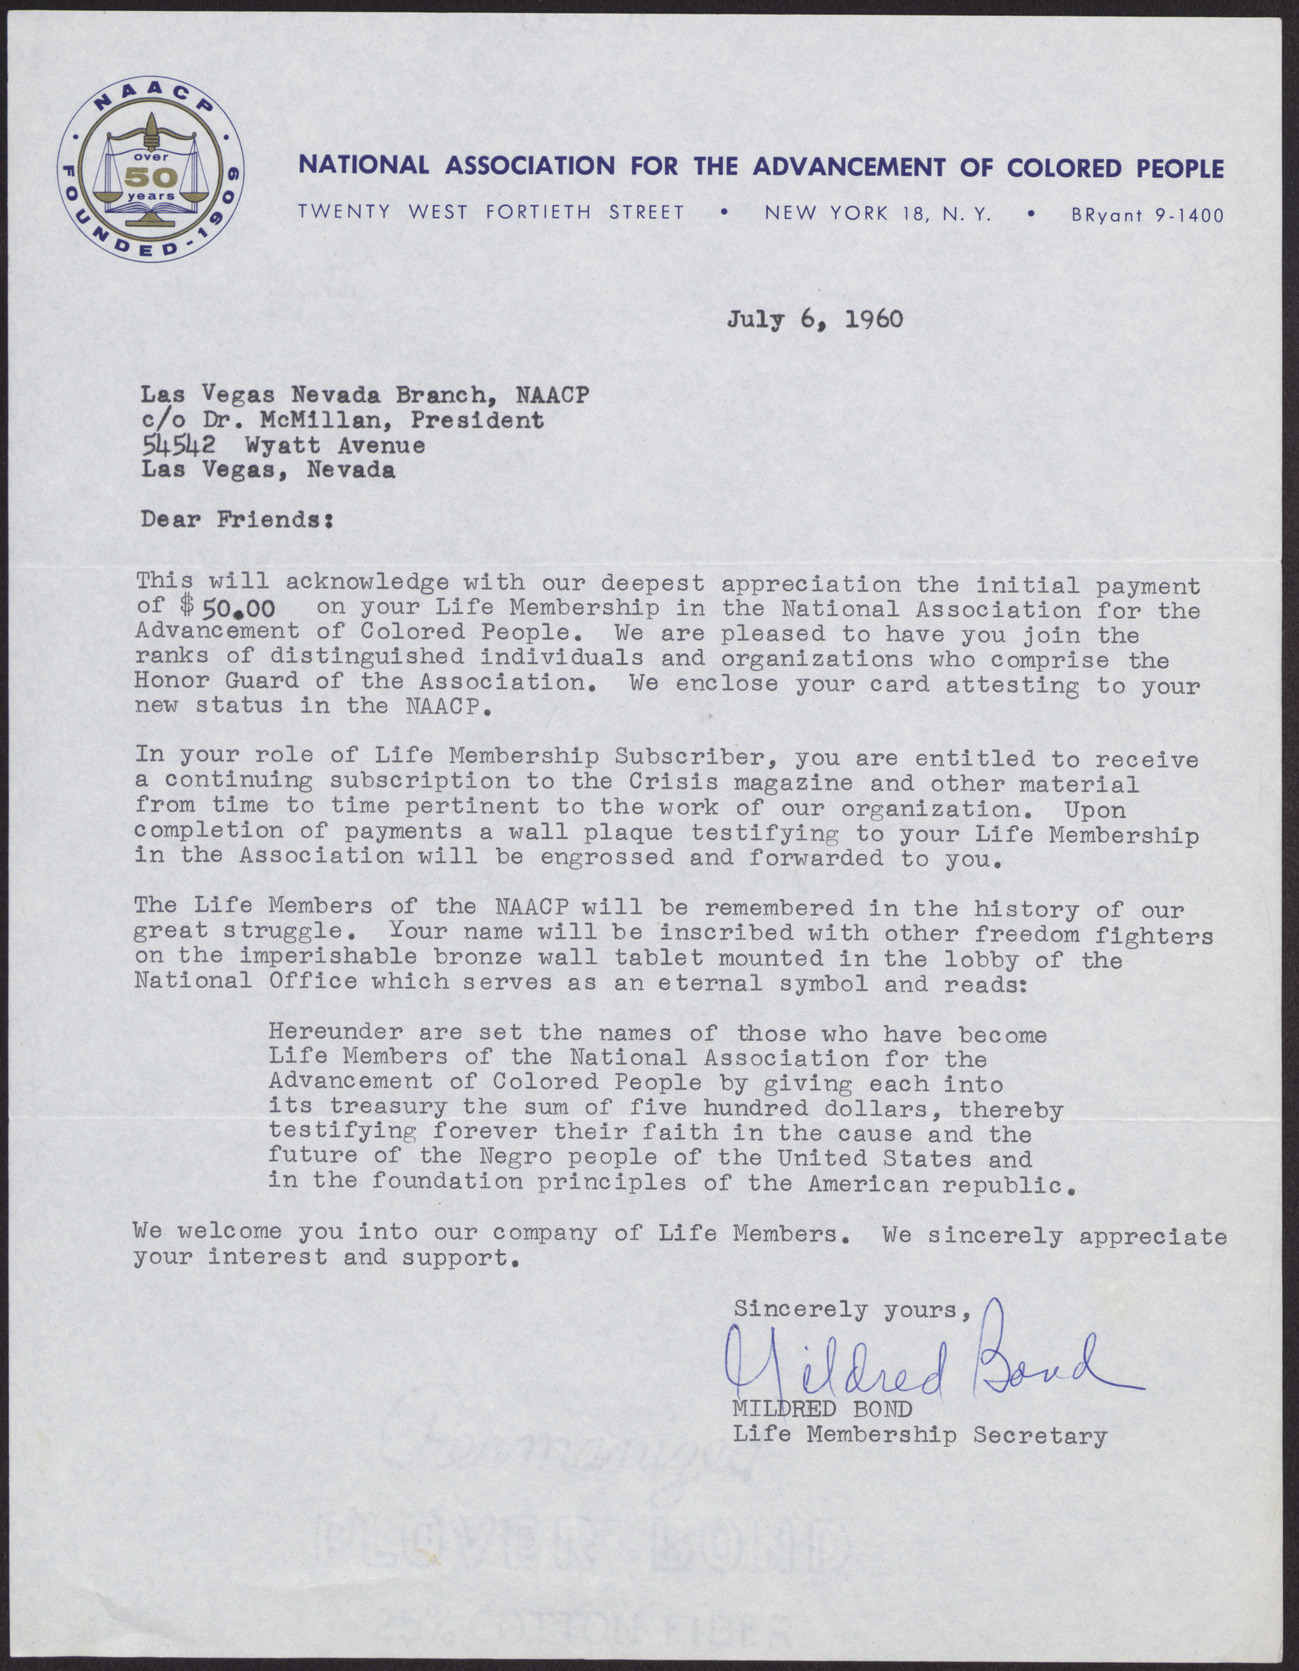 Letter to Las Vegas NAACP branch from Mildred Bond, July 6, 1960